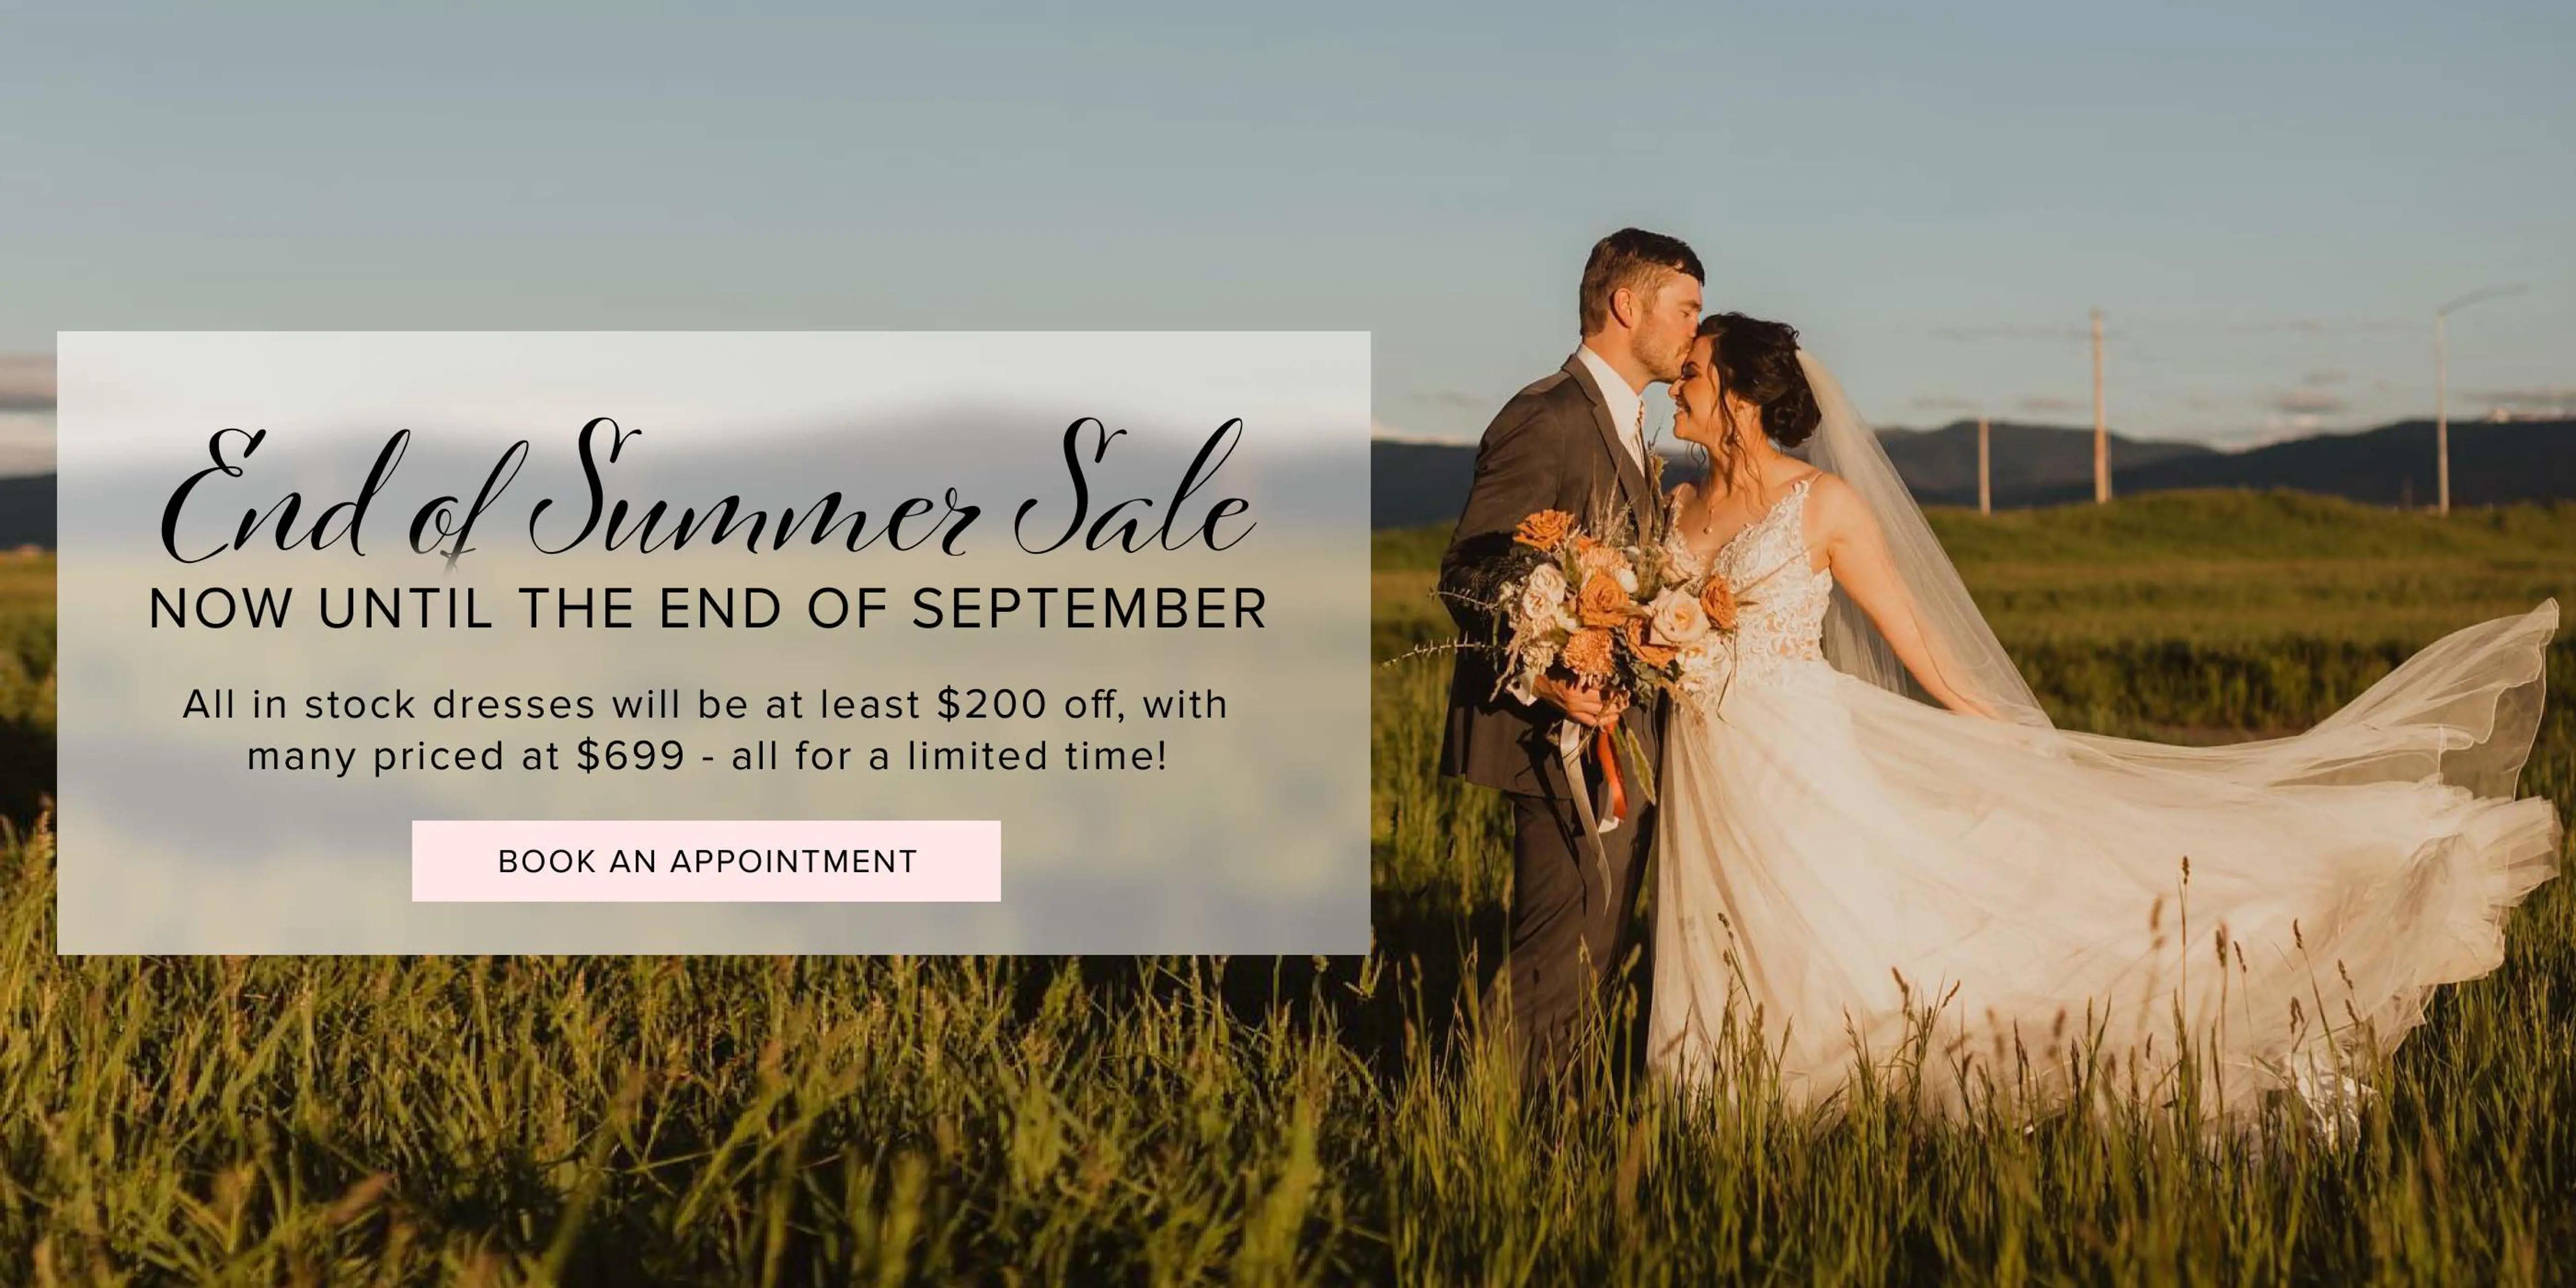 End of Summer Sample Sale at After 5 and Weddings